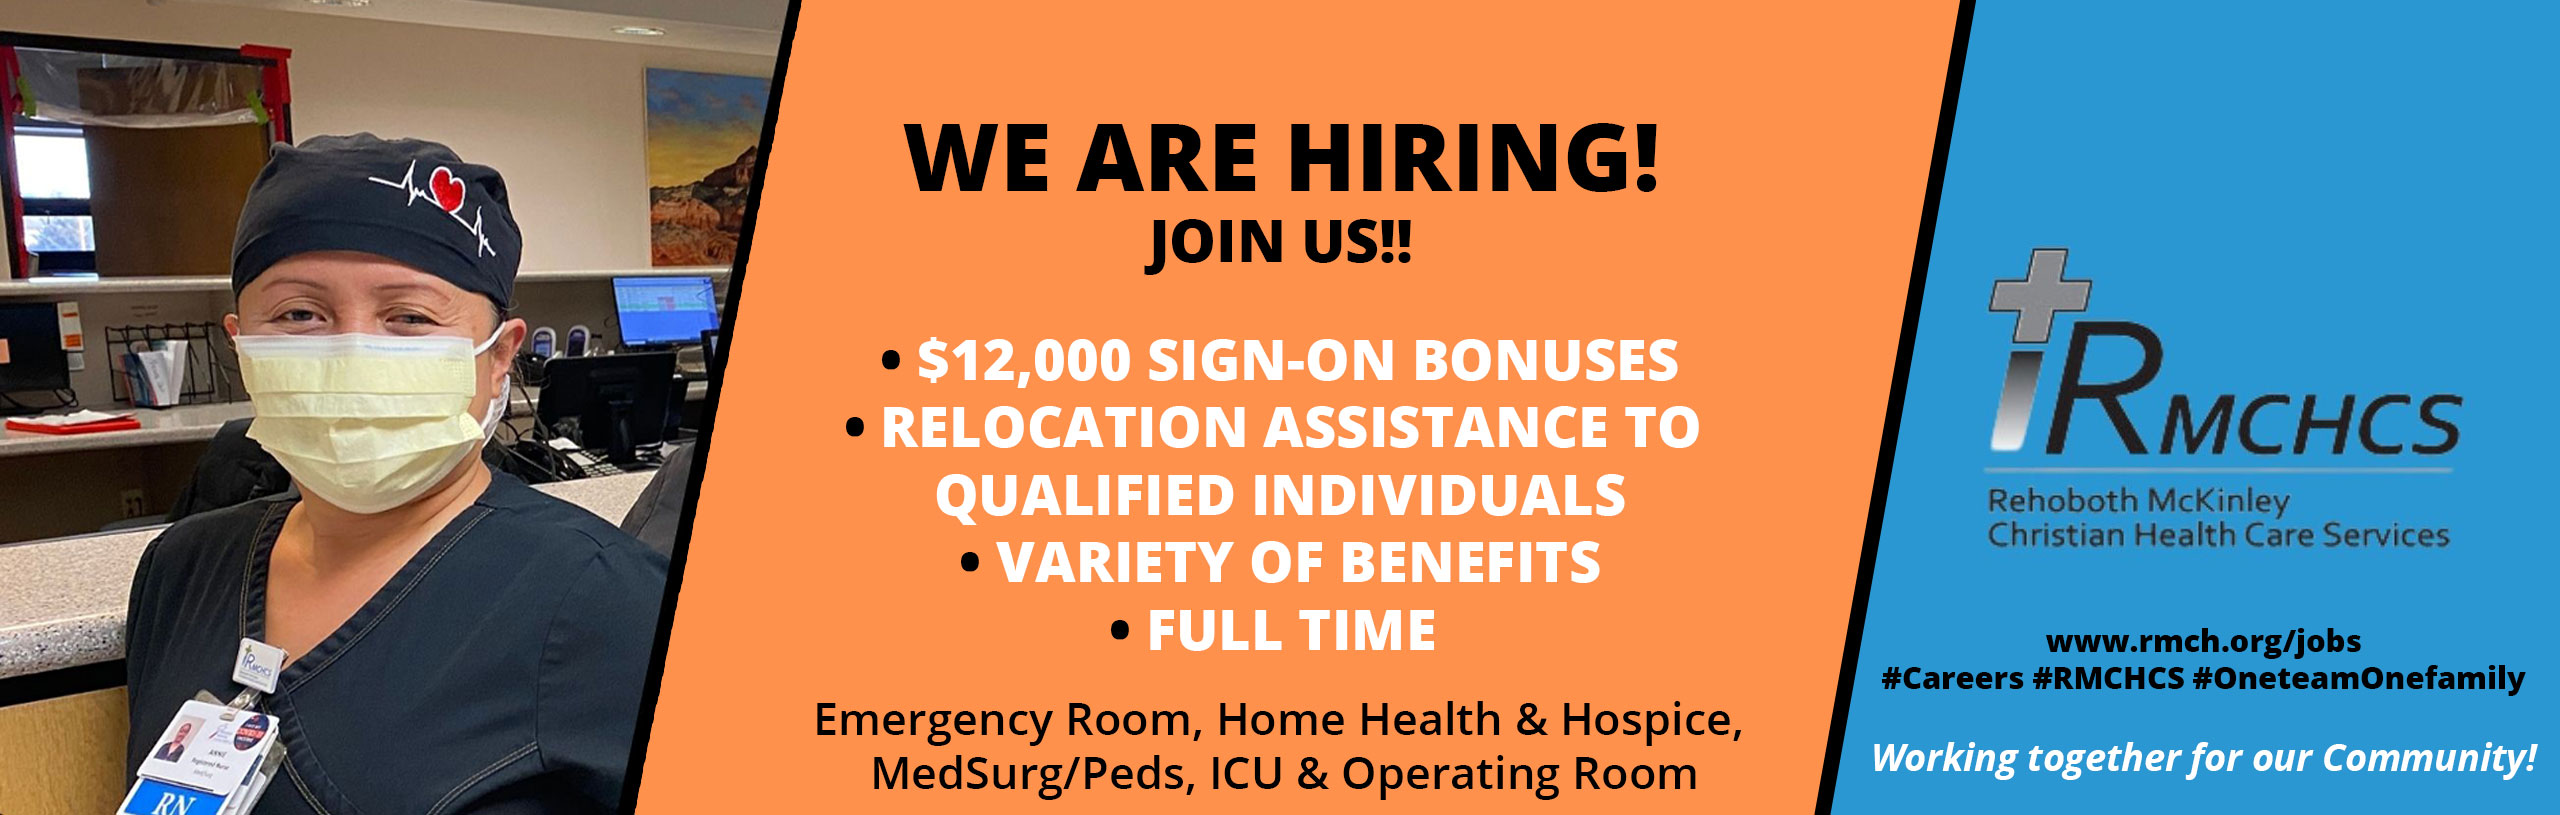 Banner picture of a female Nurse wearing a mask. She is sitting down at a Nurses Station.

Banner says:

WE ARE HIRING!
JOIN US!!

*$12,000 SIGN-ON BONUSES
* RELOCATION ASSISTANCE TO QUALIFIED INDIVIDUALS
* VARIETY OF BENEFITS
* FULL TIME

Emergency Room, Home Health & Hospice, Med/Surg/Peds, ICU & Operating Room


+RMCHCS
Rehoboth Mckinley Christian Health Care Services

www.rmch.org/jobs
#Careers #RMCHCS #OneteamOnefamily

Working together for our Community!